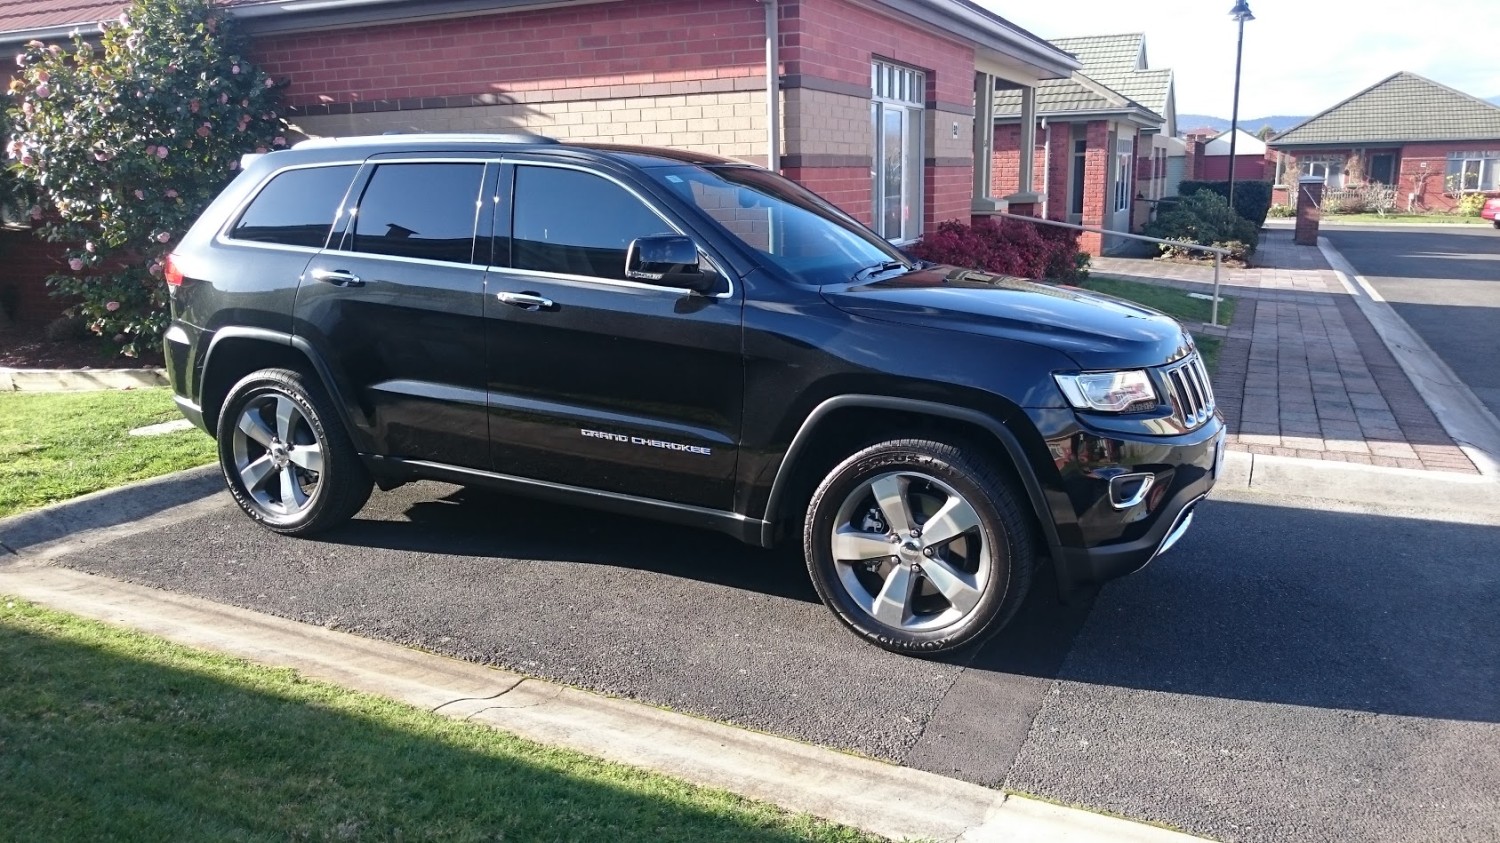 2016 Jeep Grand Cherokee Limited - USA66 - Shannons Club